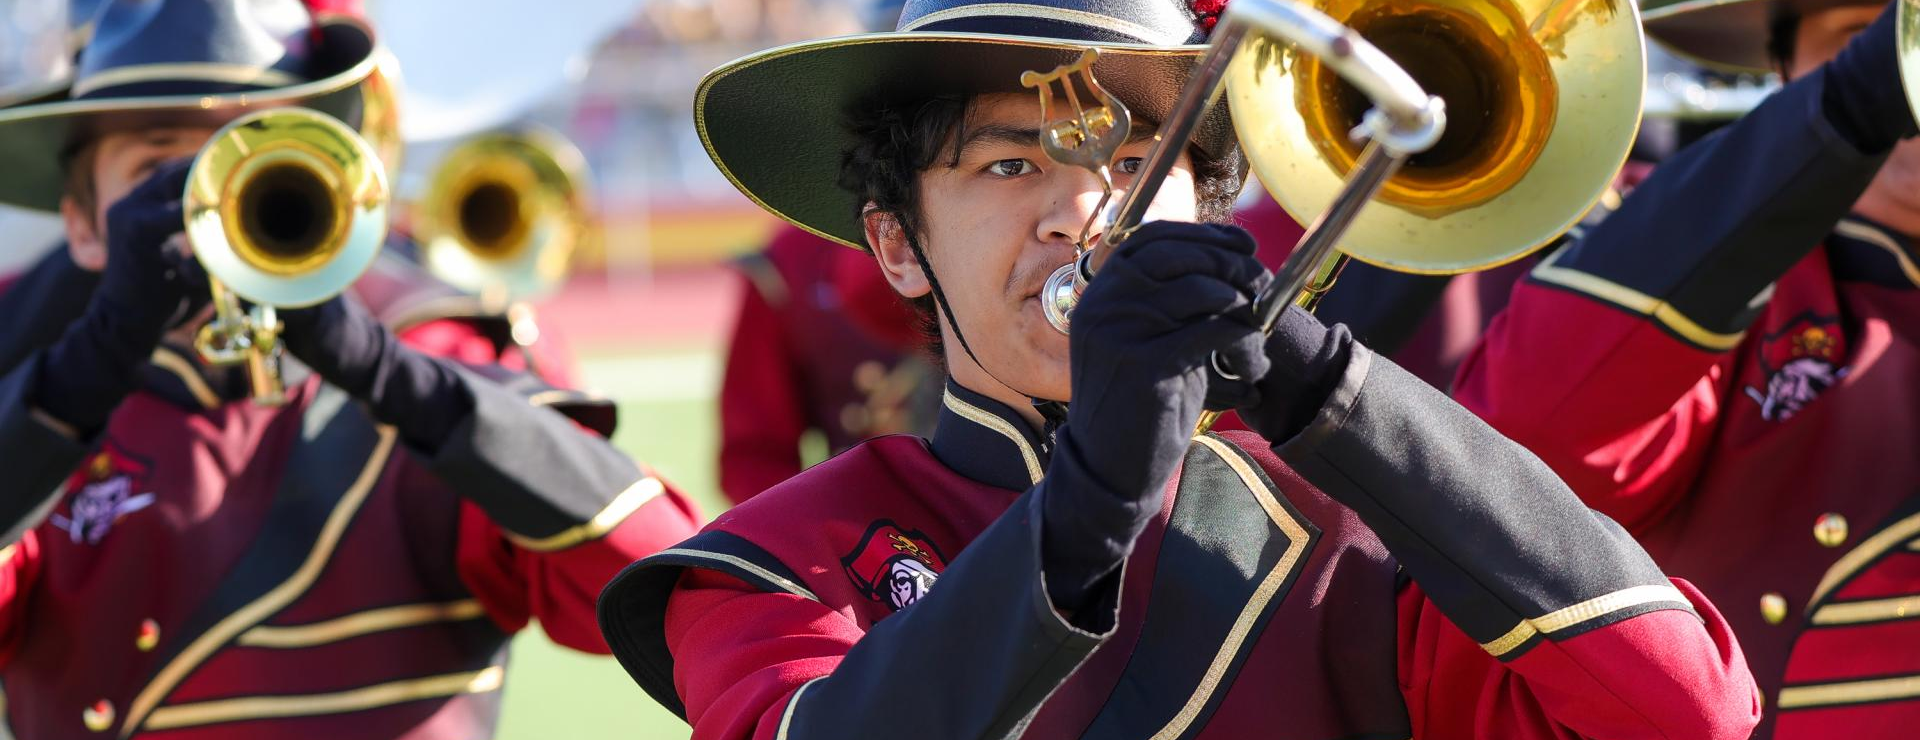 Image of trombone player in full uniform on the football field.